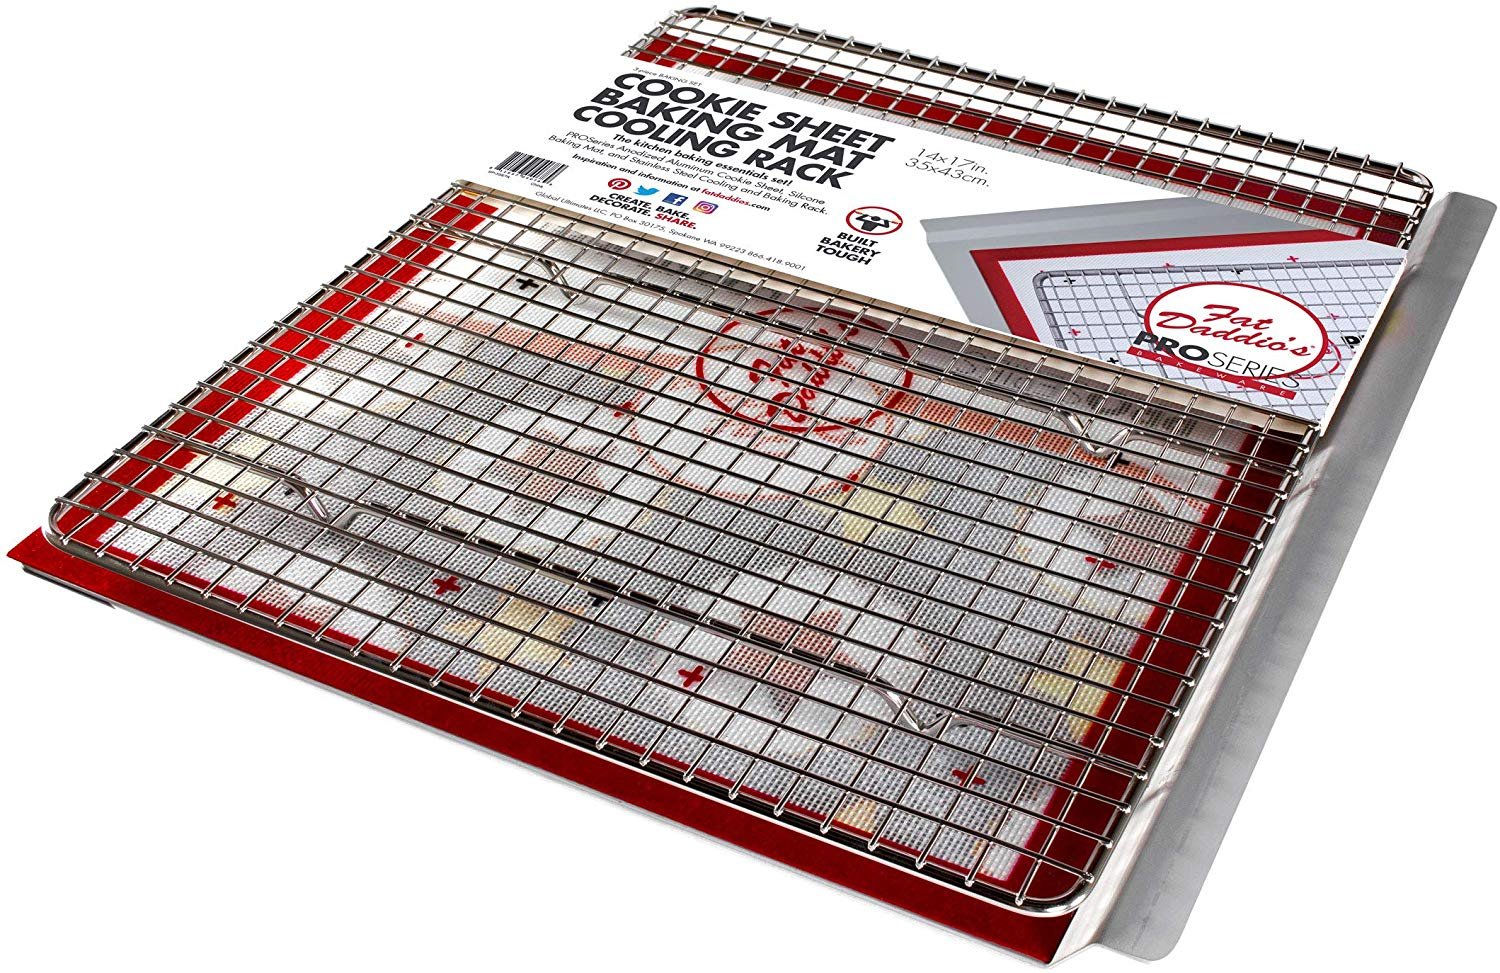 Aluminum Baking Sheet with Stainless Steel Cooling Rack Set | KPKitchen